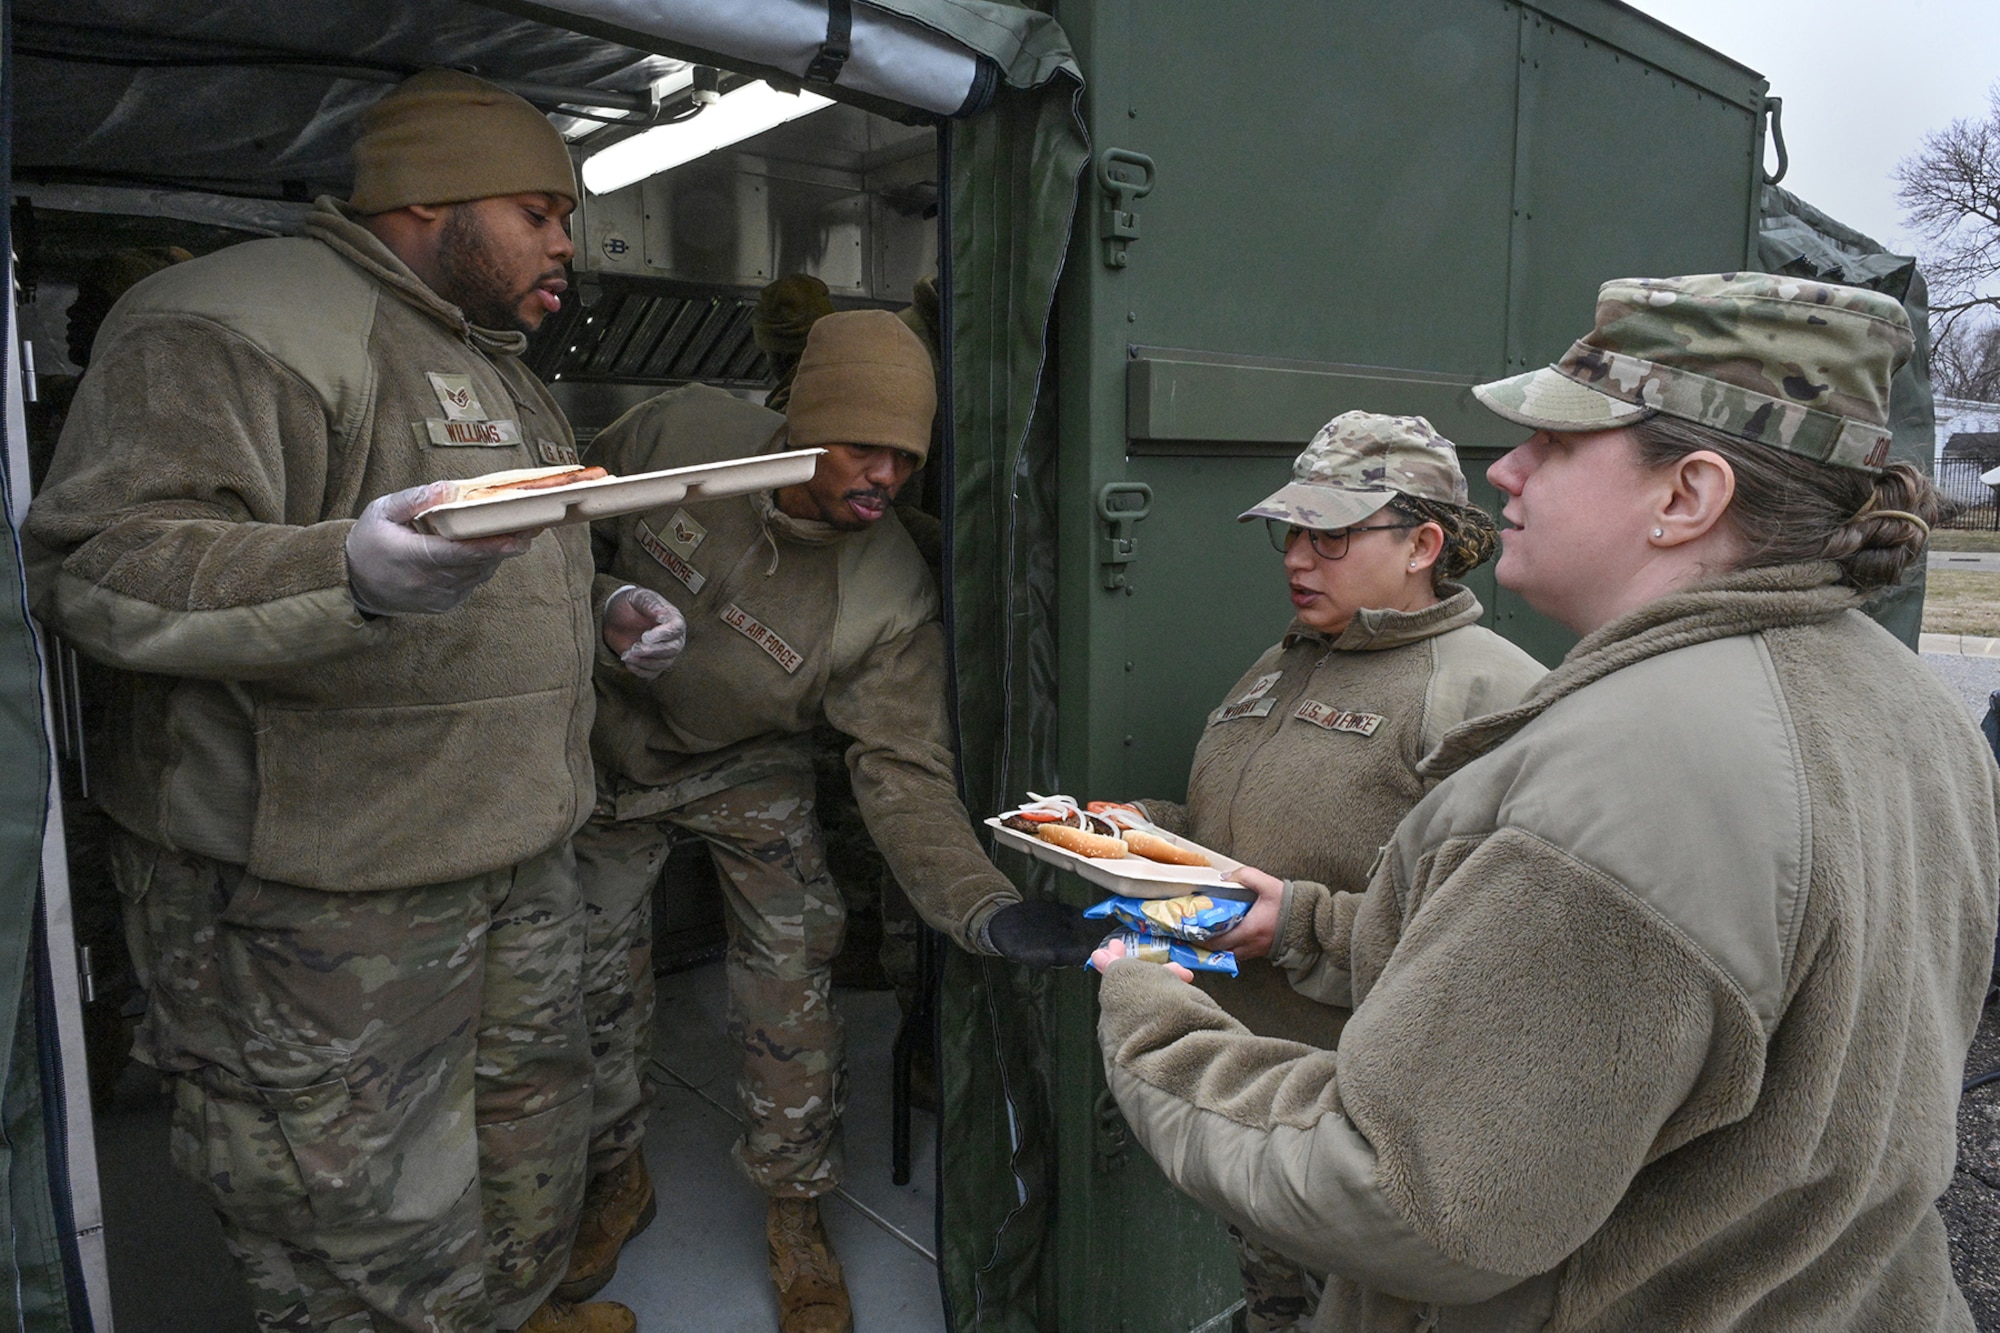 U.S. Air Force Staff Sgt. Devonte Williams, left, and Staff Sgt. Dontrell Lattimore, both services craftsmen with the 127th Force Support Squadron, serve freshly cooked hot-A meals to Master Sgt. Sarah Wright and Tech. Sgt. Katherine Johnson of the 127th Wing.